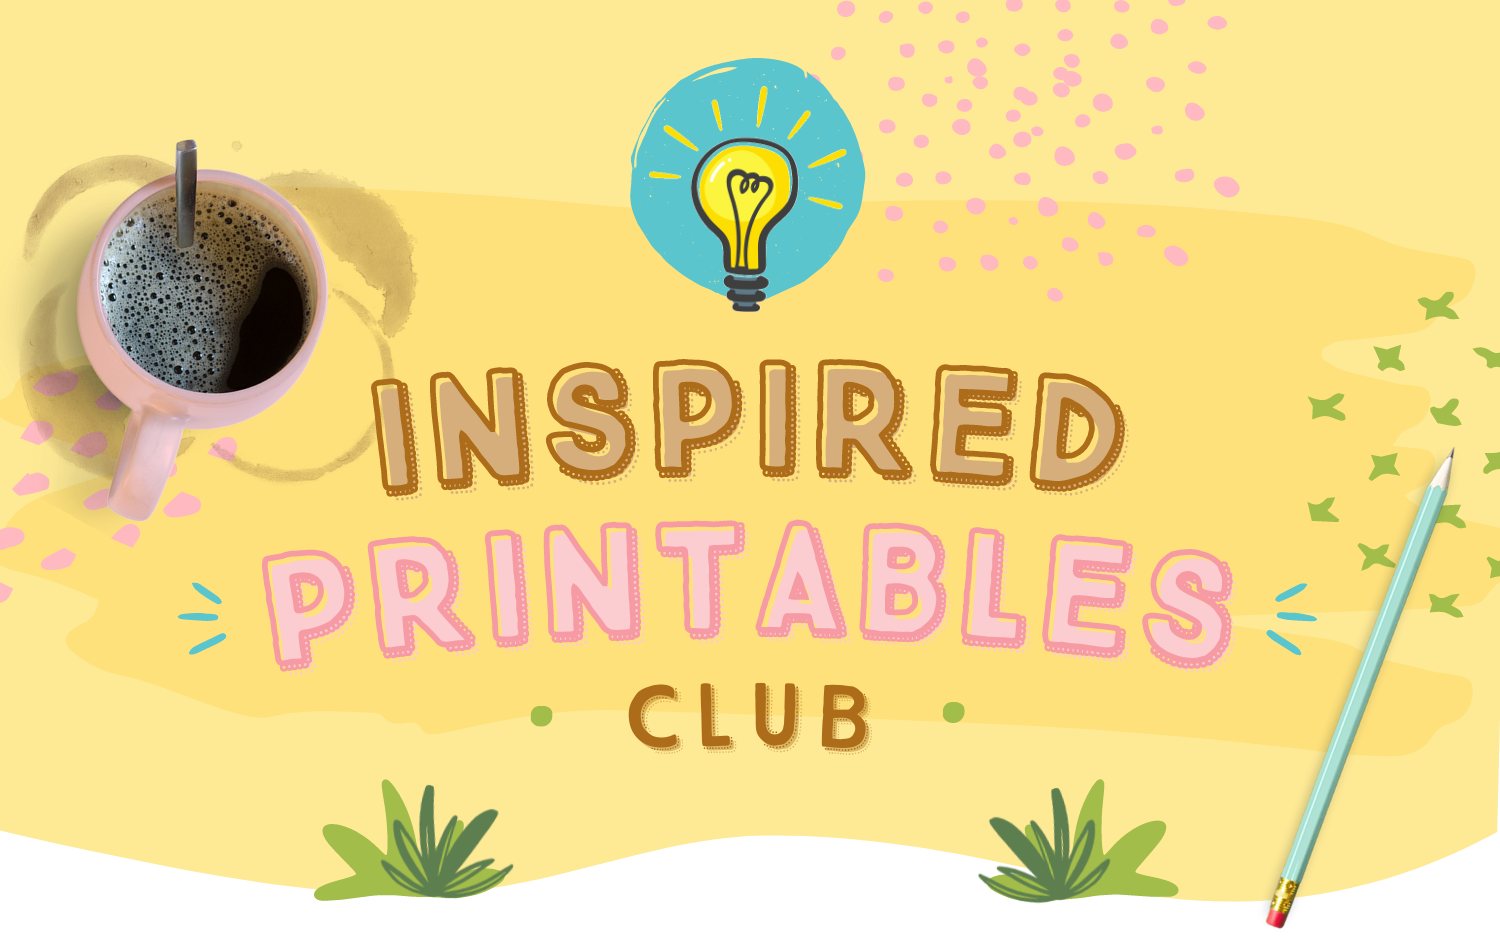 The Inspired Printables Club